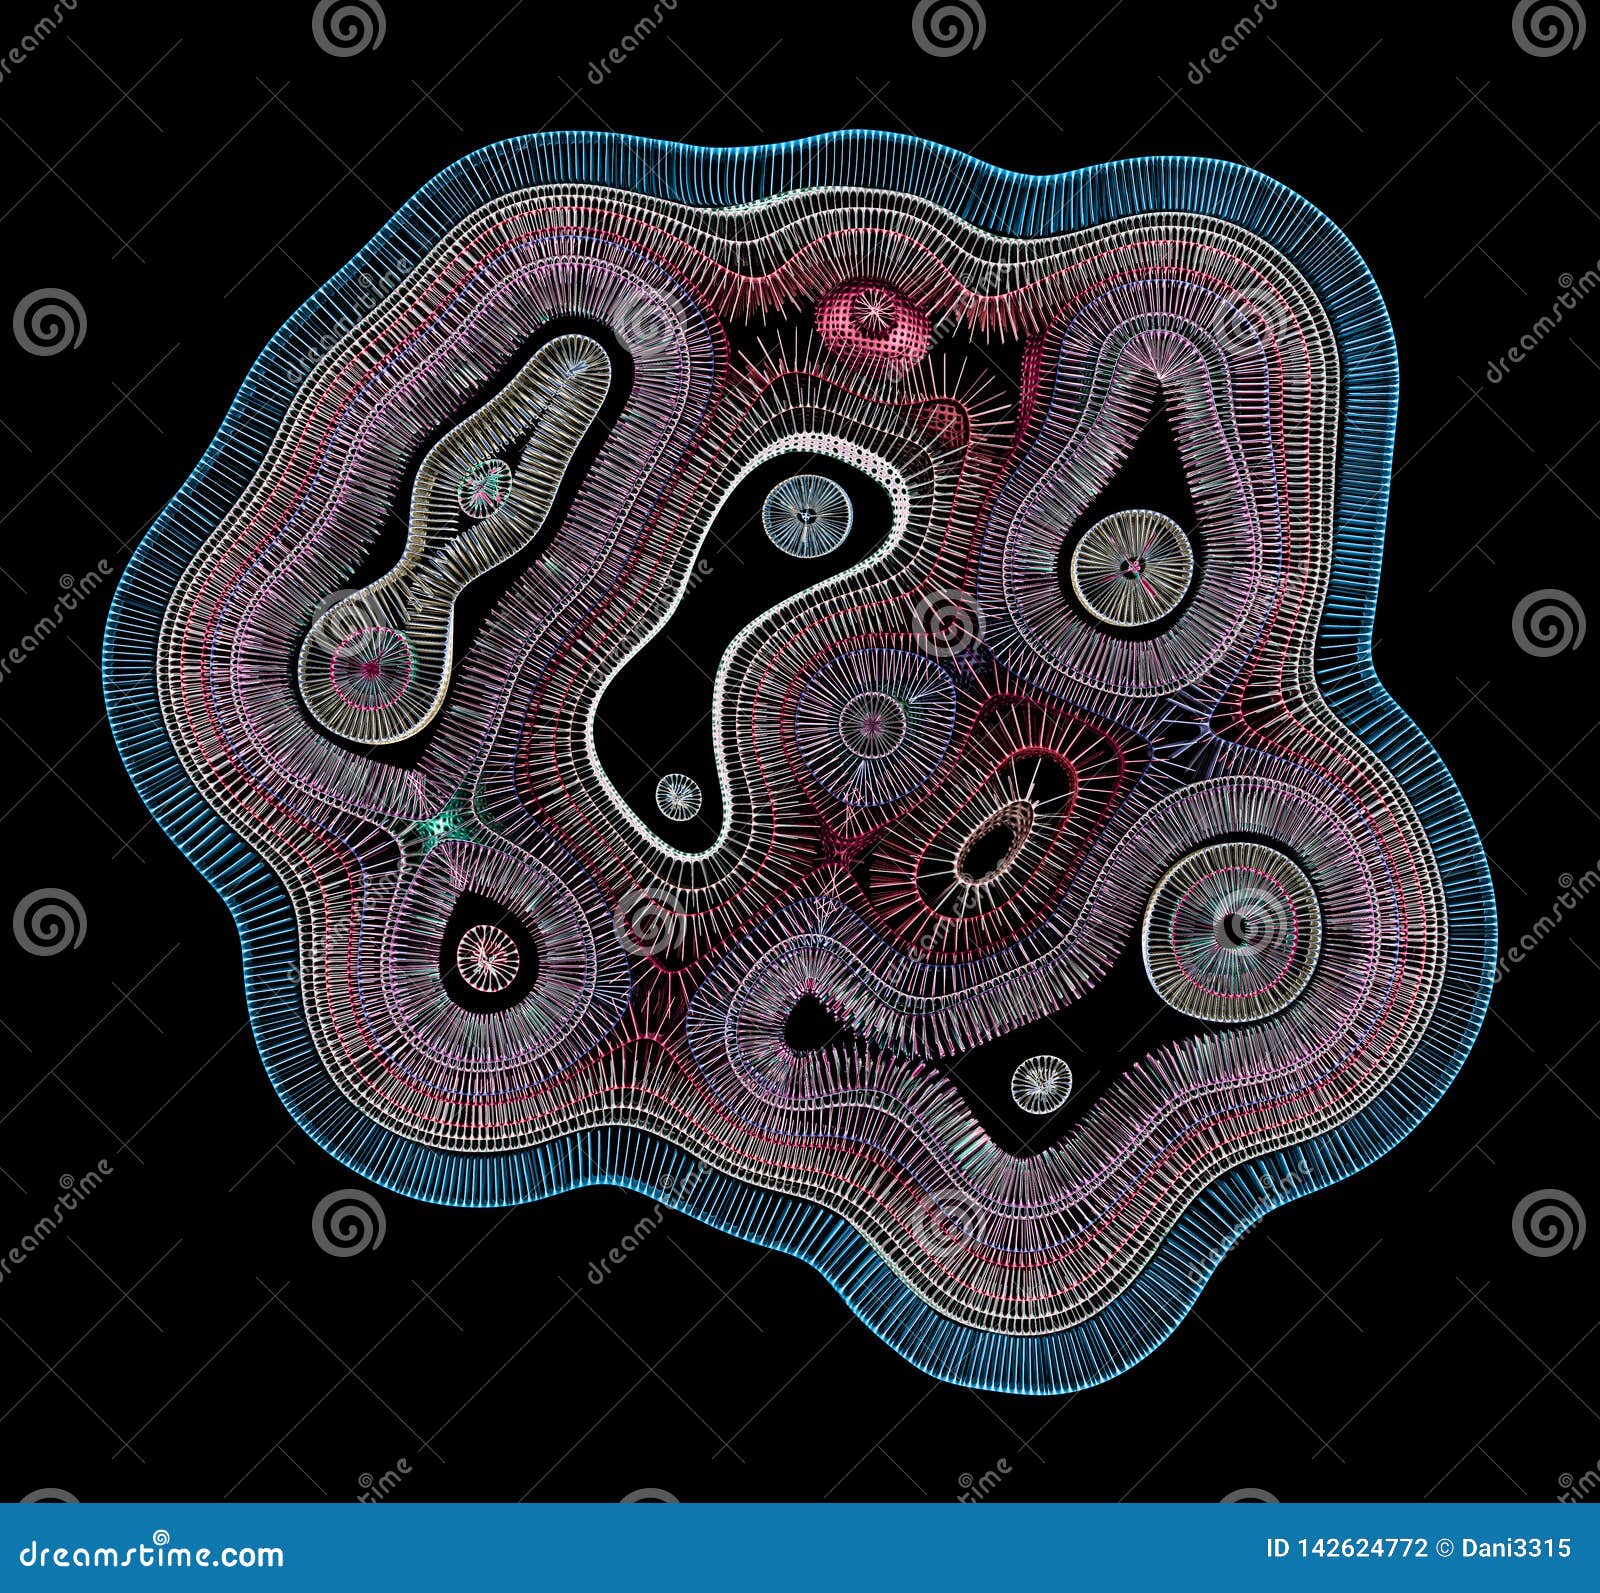 cross section of an organic cell with intracellular organelles